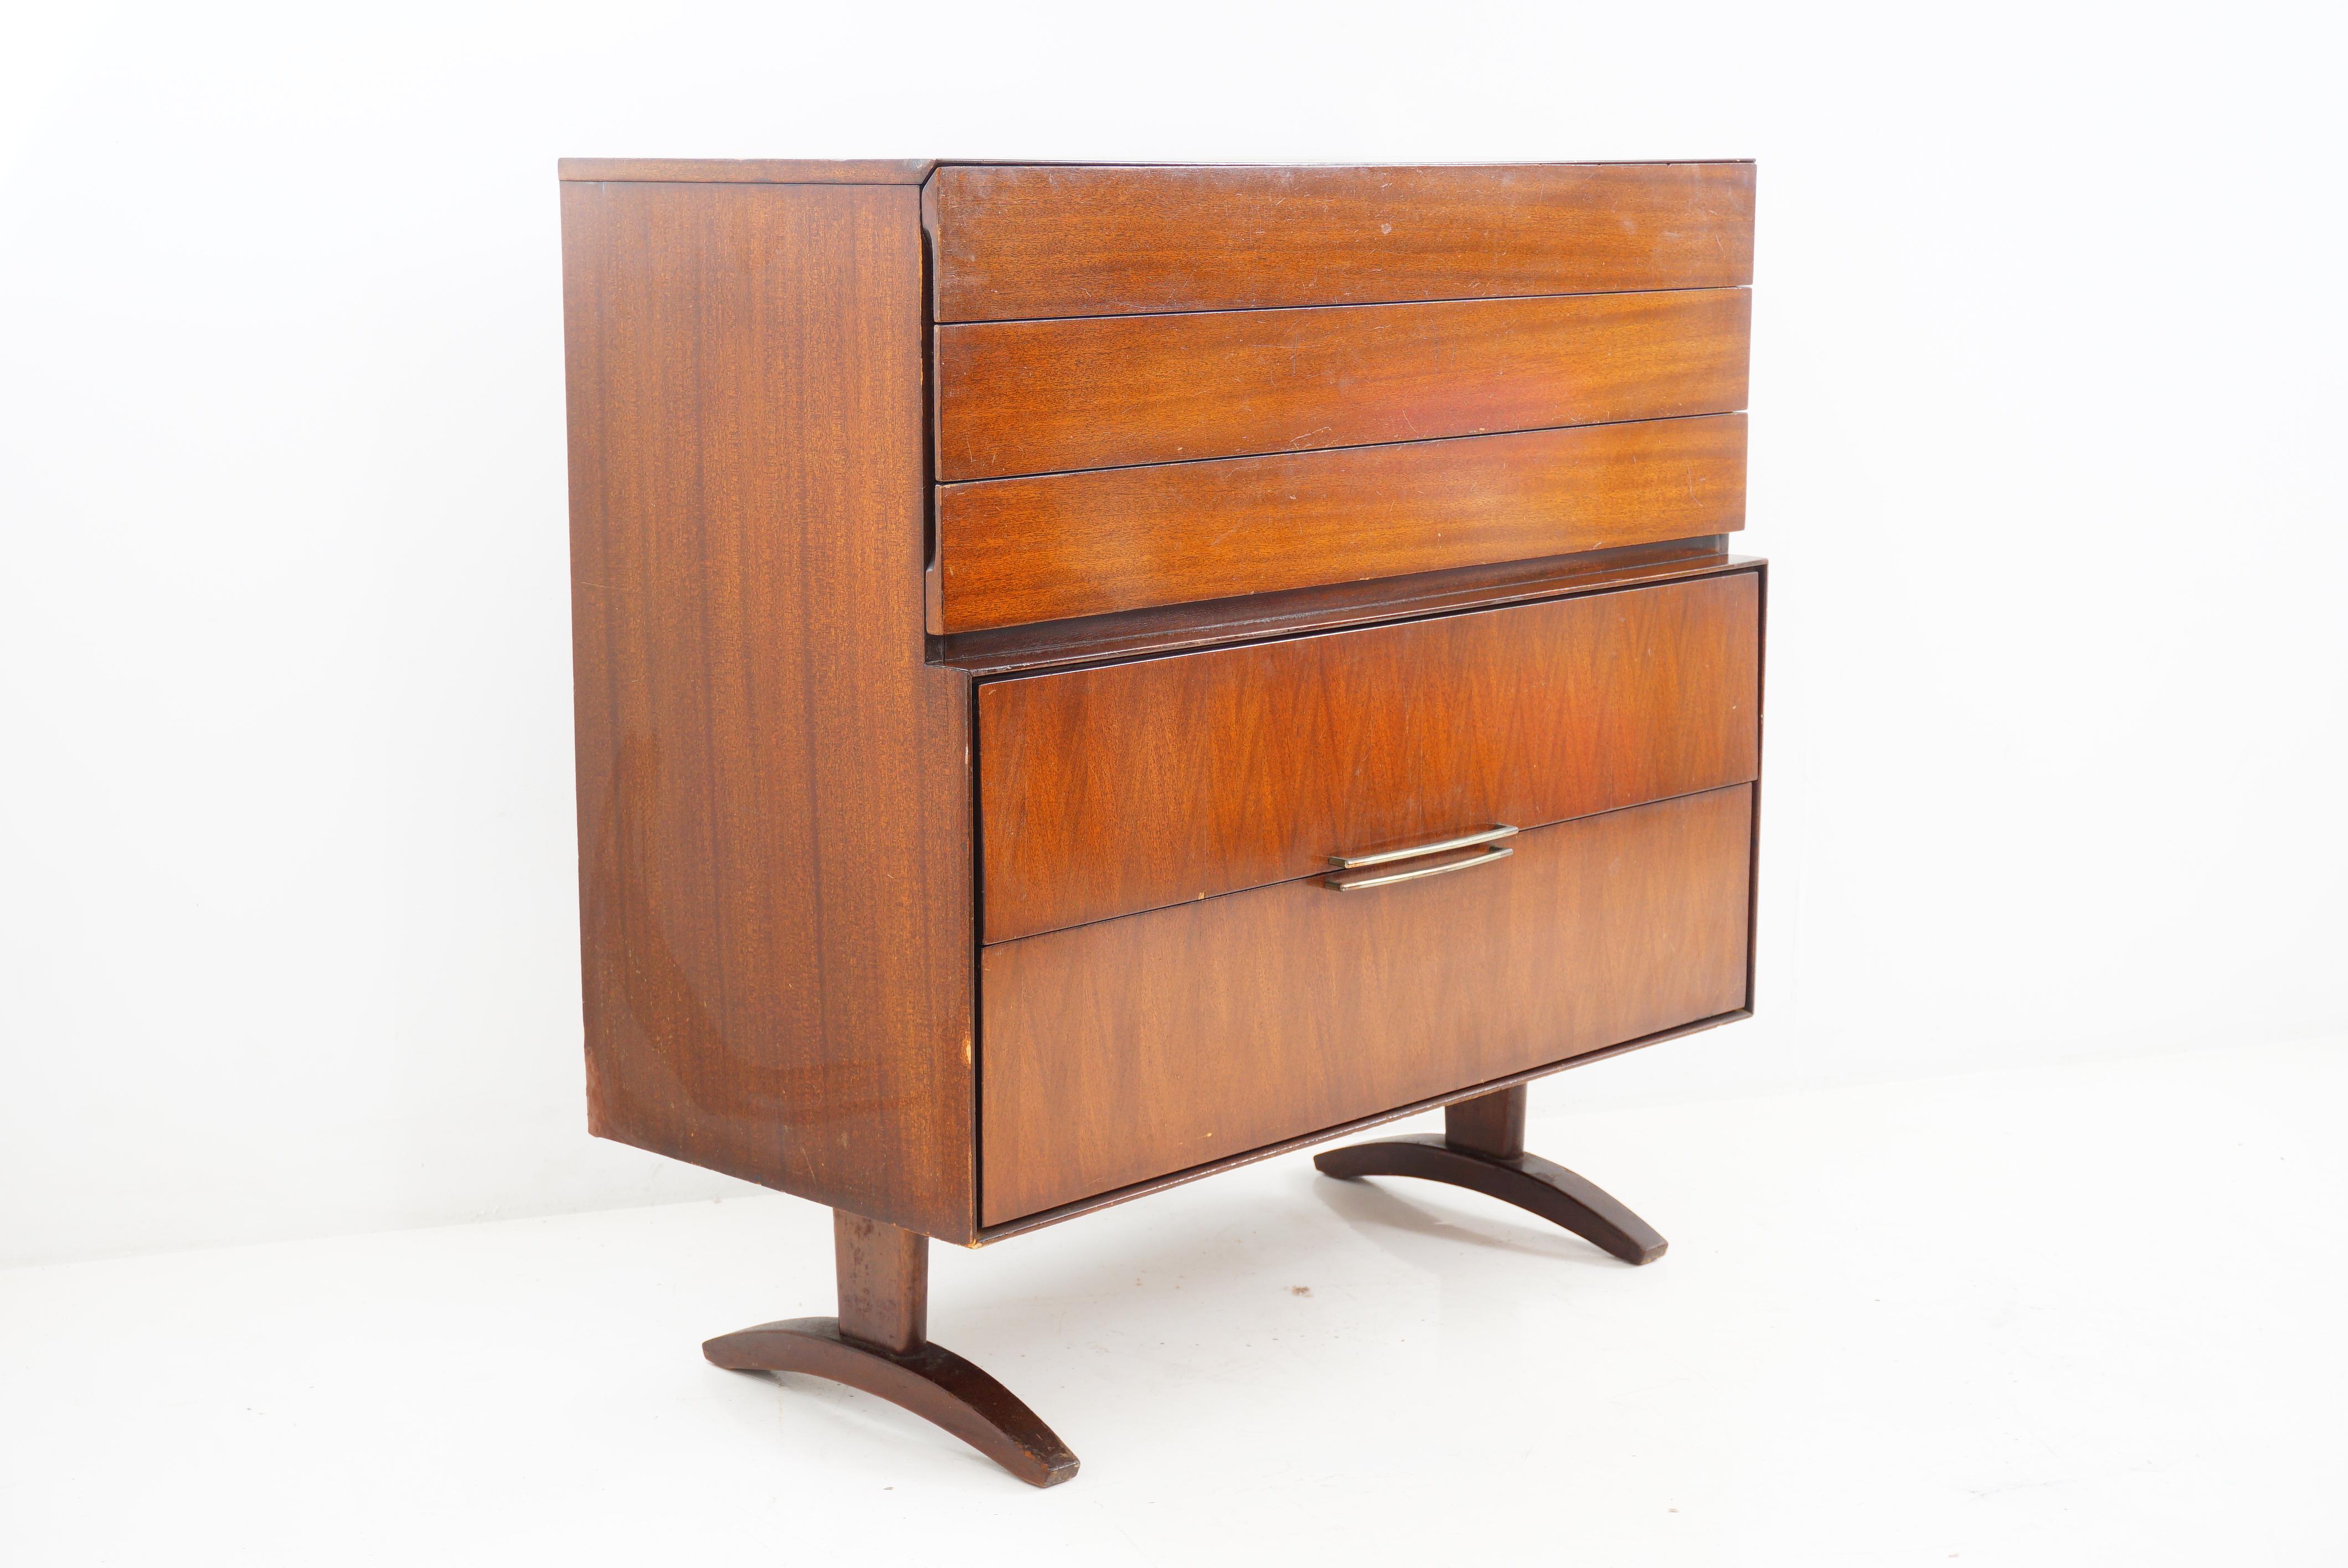 A Mid-Century Modern highboy that adds a hefty dose of style to your space. Crafted from lustrous walnut, this sleek highboy is more than just storage; it's a statement piece that effortlessly bridges the gap between function and sophistication.

-